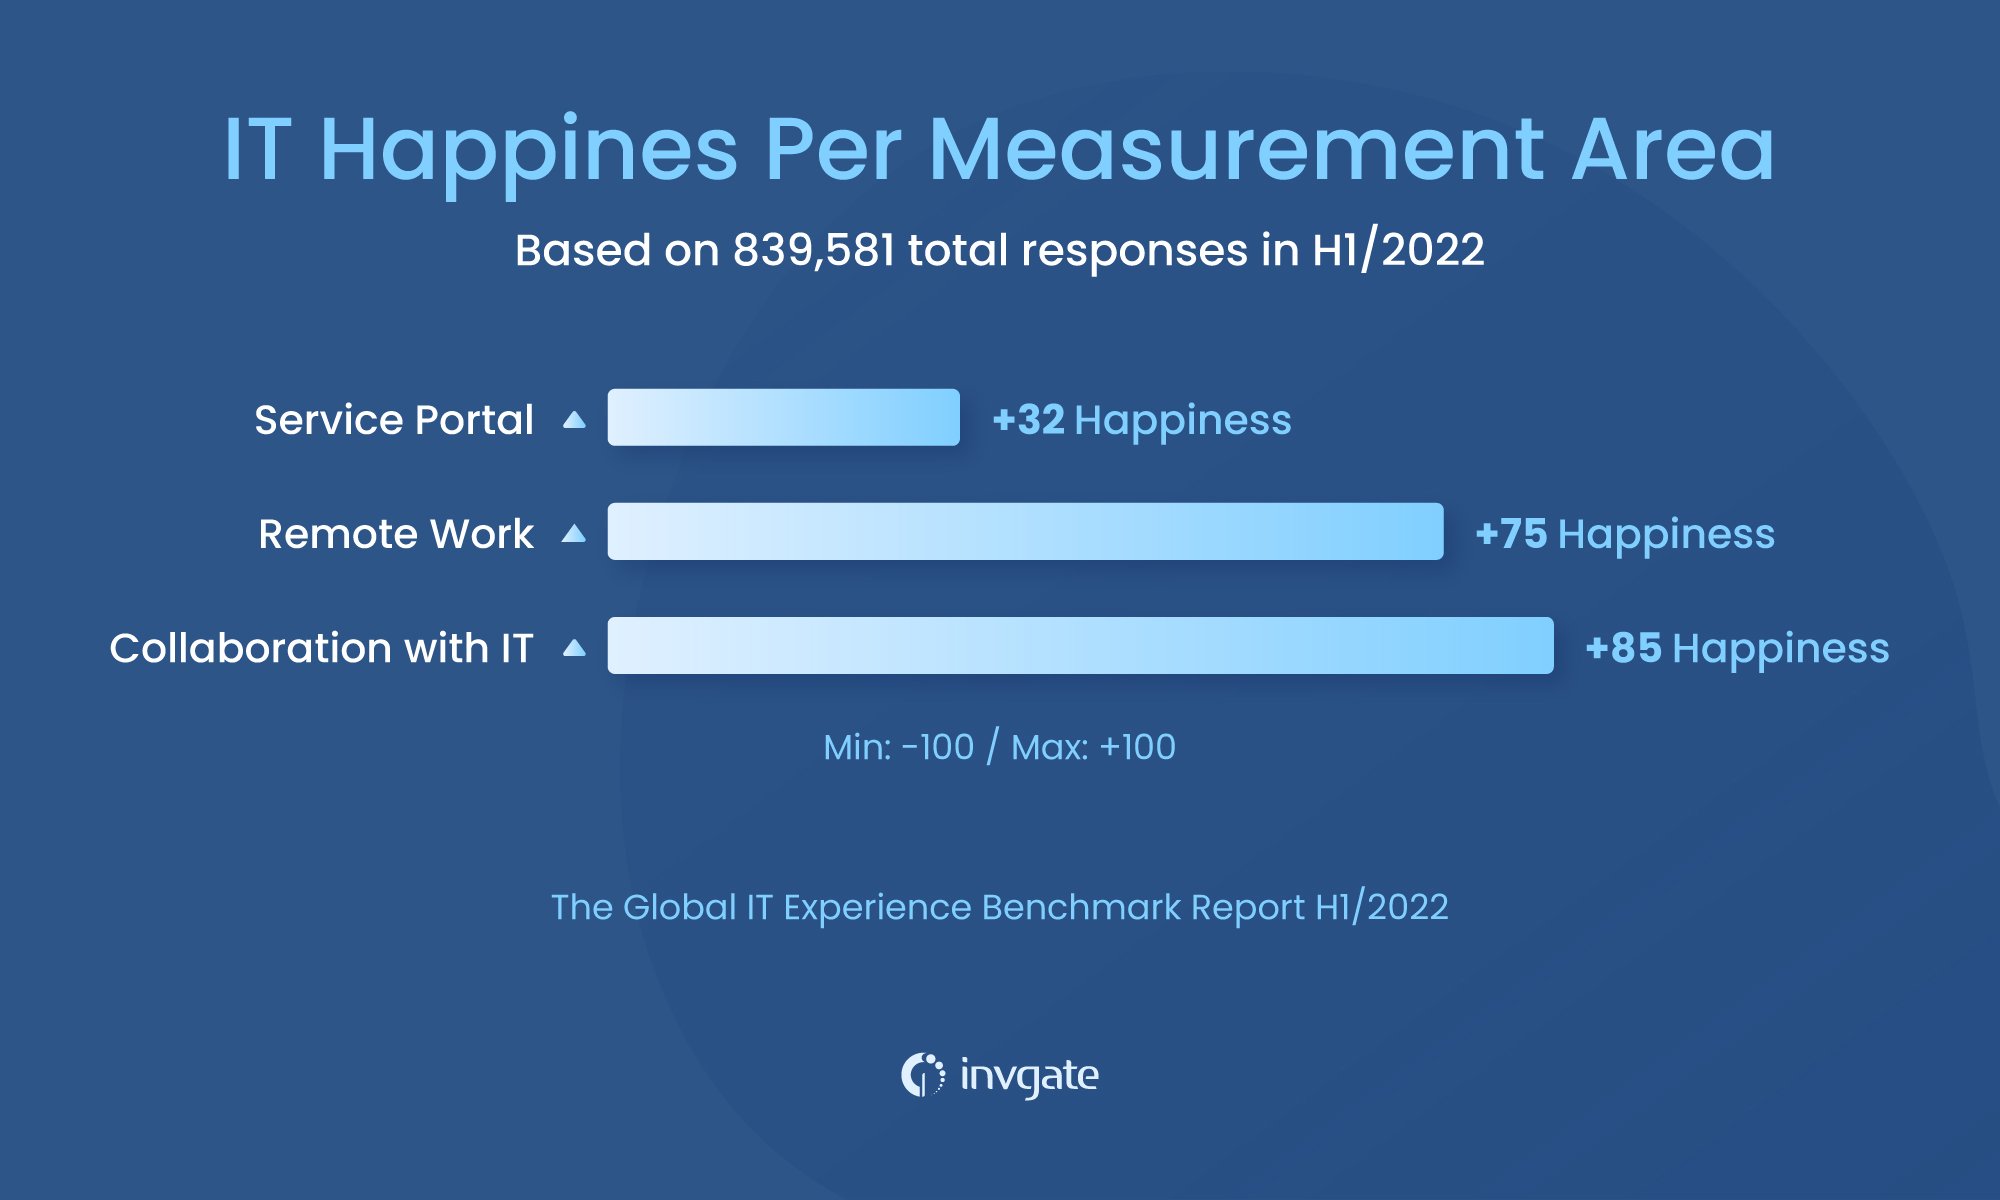 The key finding is that employees are generally happy with their service desk. The average happiness score across all industries is +32, which is up from +24 in the previous quarter.